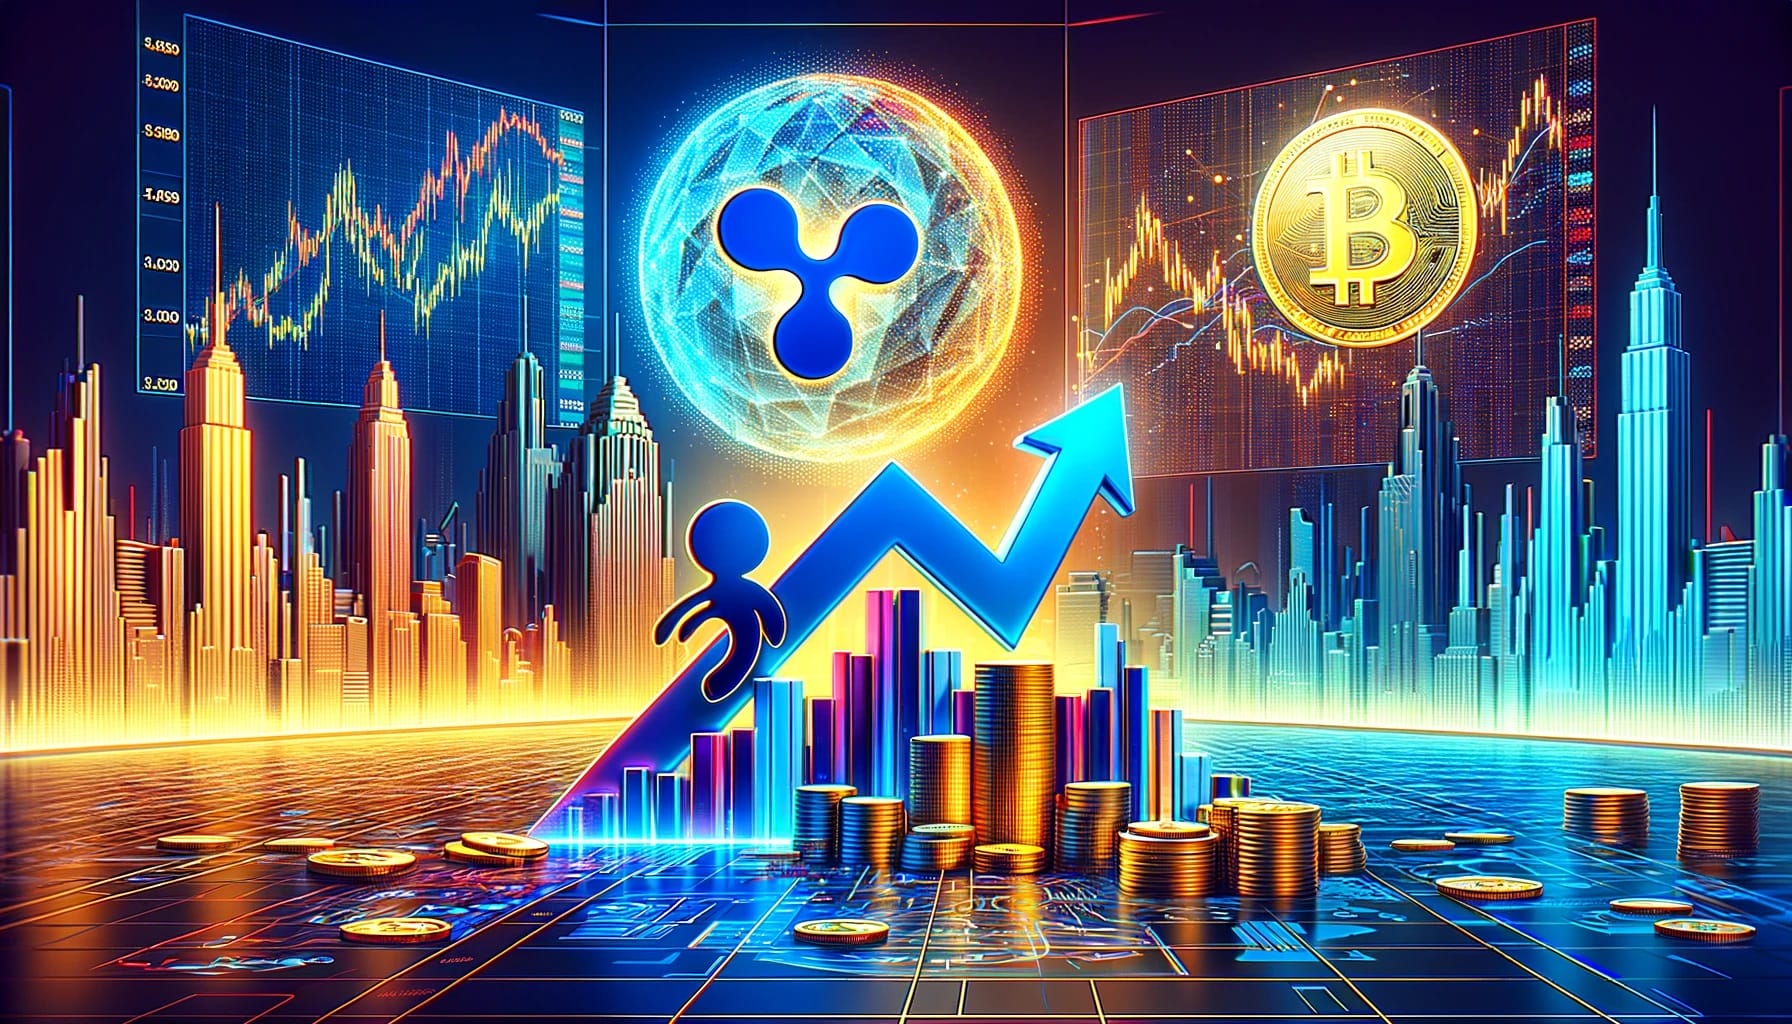 XRP Price Prediction as XRP Consolidates at $0.60 – Massive Price Surge Incoming?